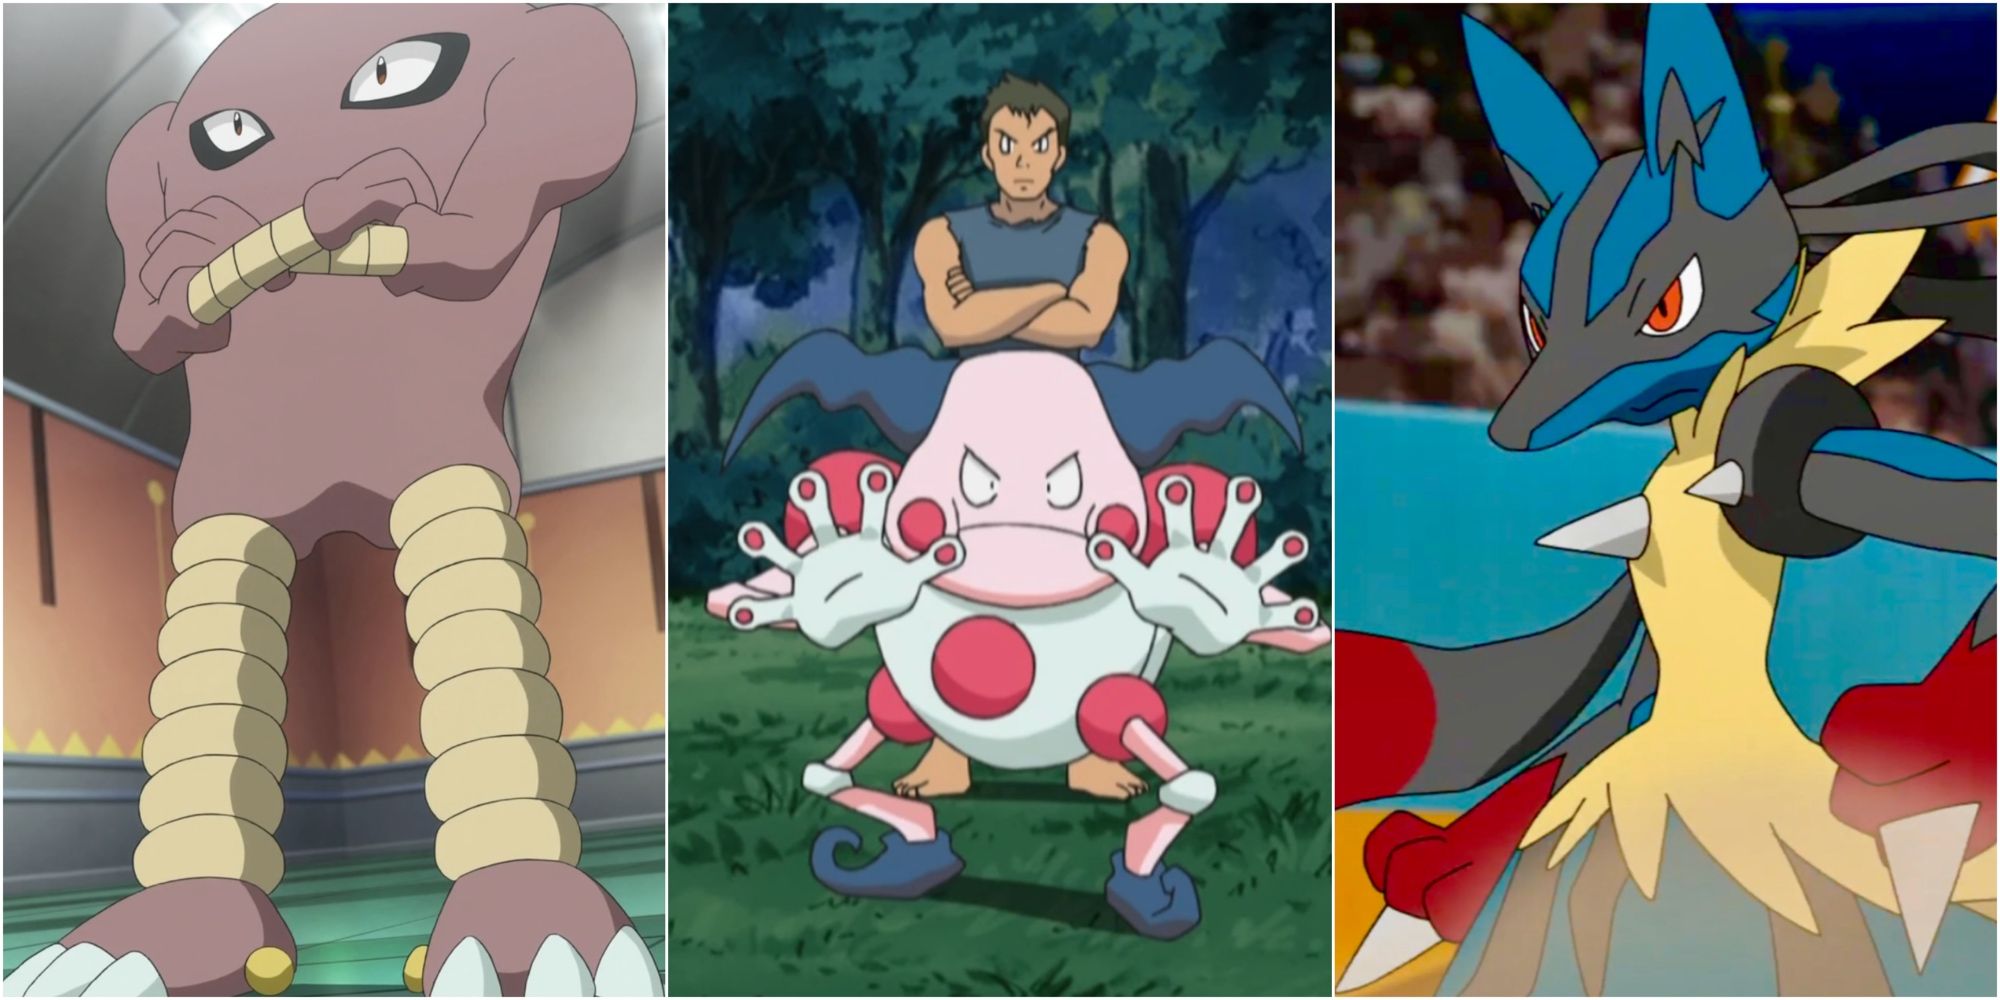 Hitmonlee, Mr Mime, and Lucario 